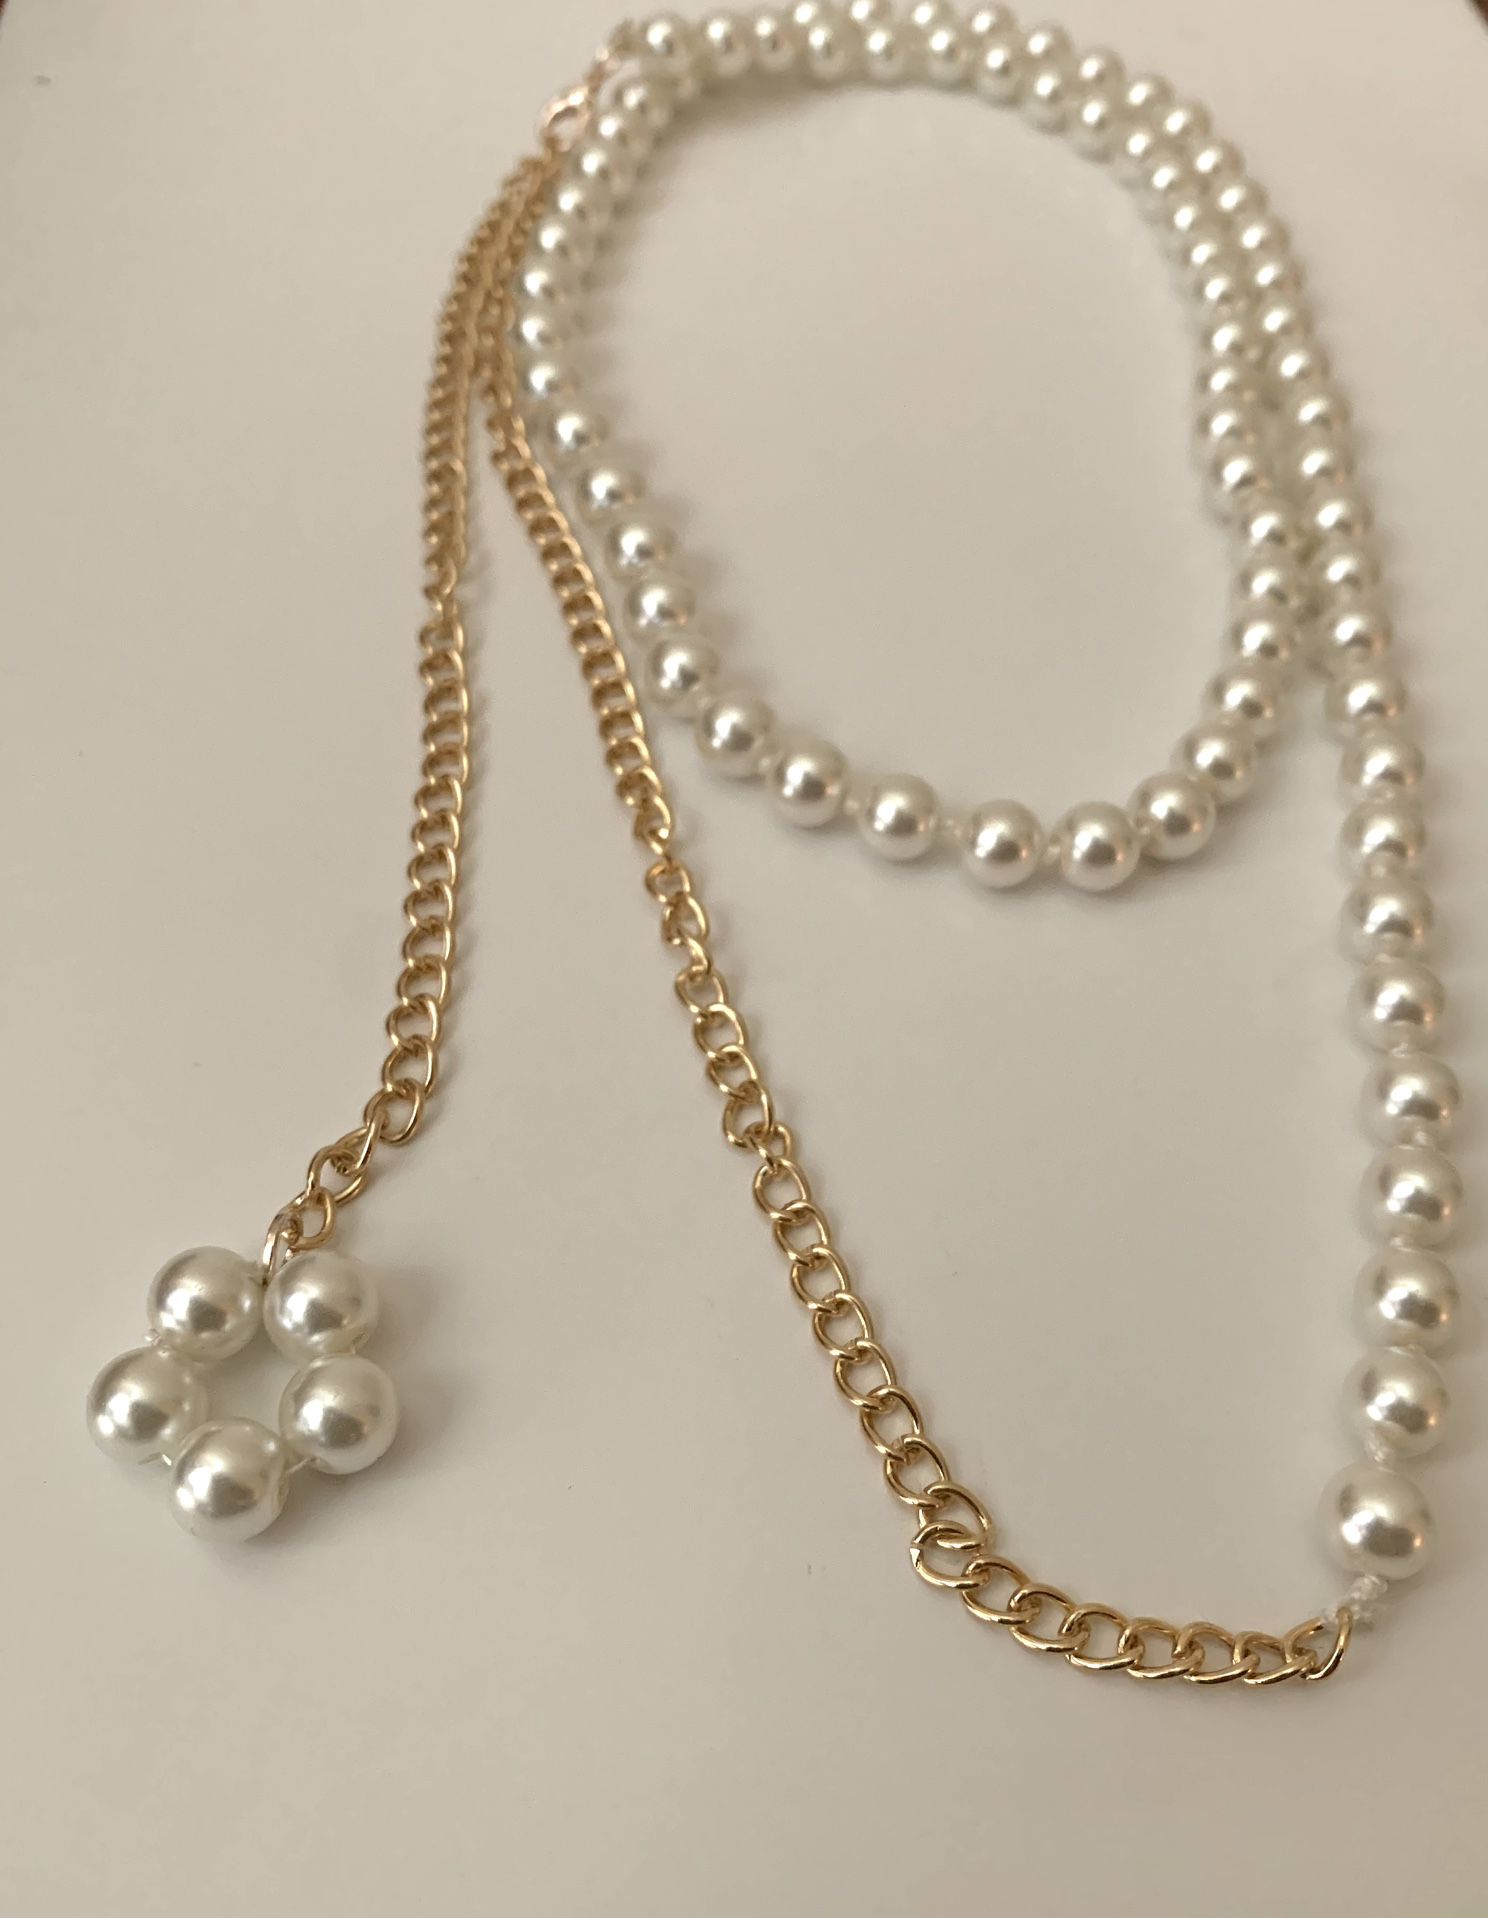 *Convertible* New Necklace or Waist Chain with a flower pendant, 41” Long